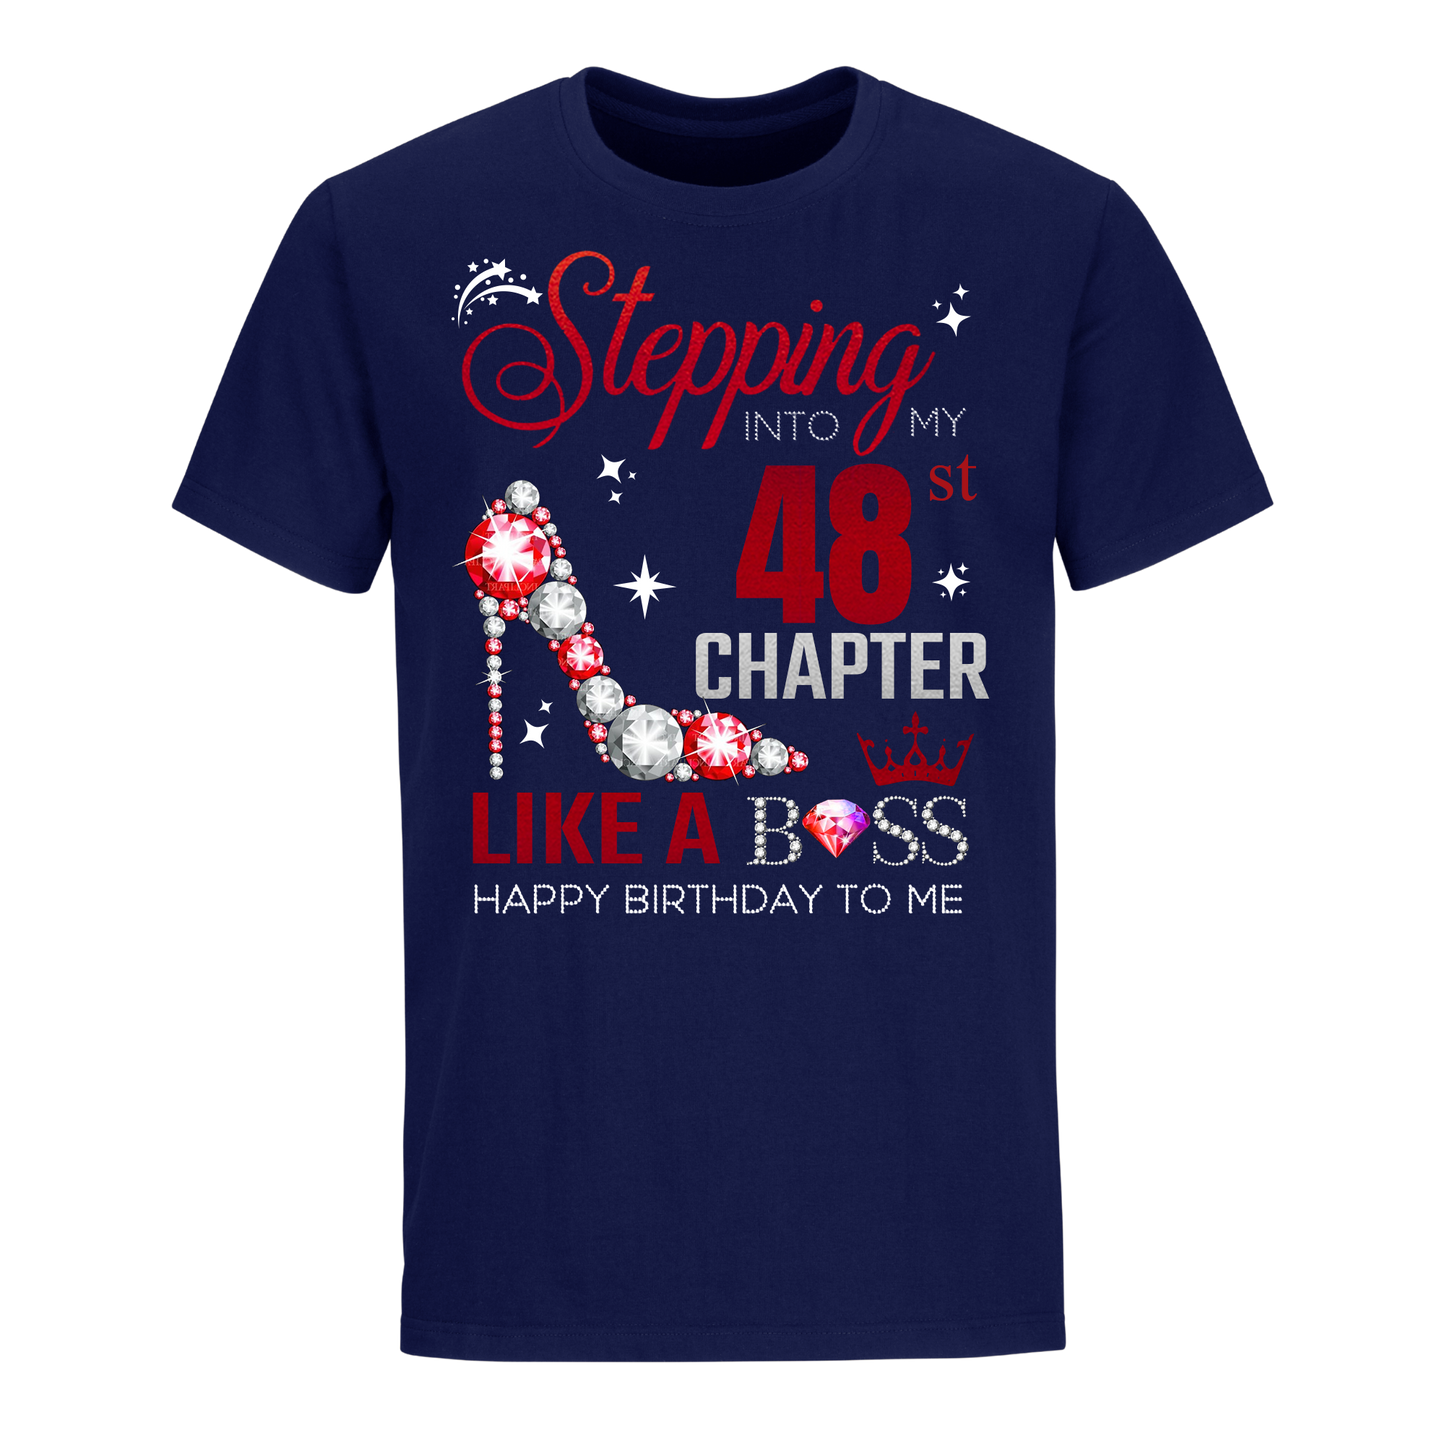 STEPPING INTO MY 48TH CHAPTER UNISEX SHIRT